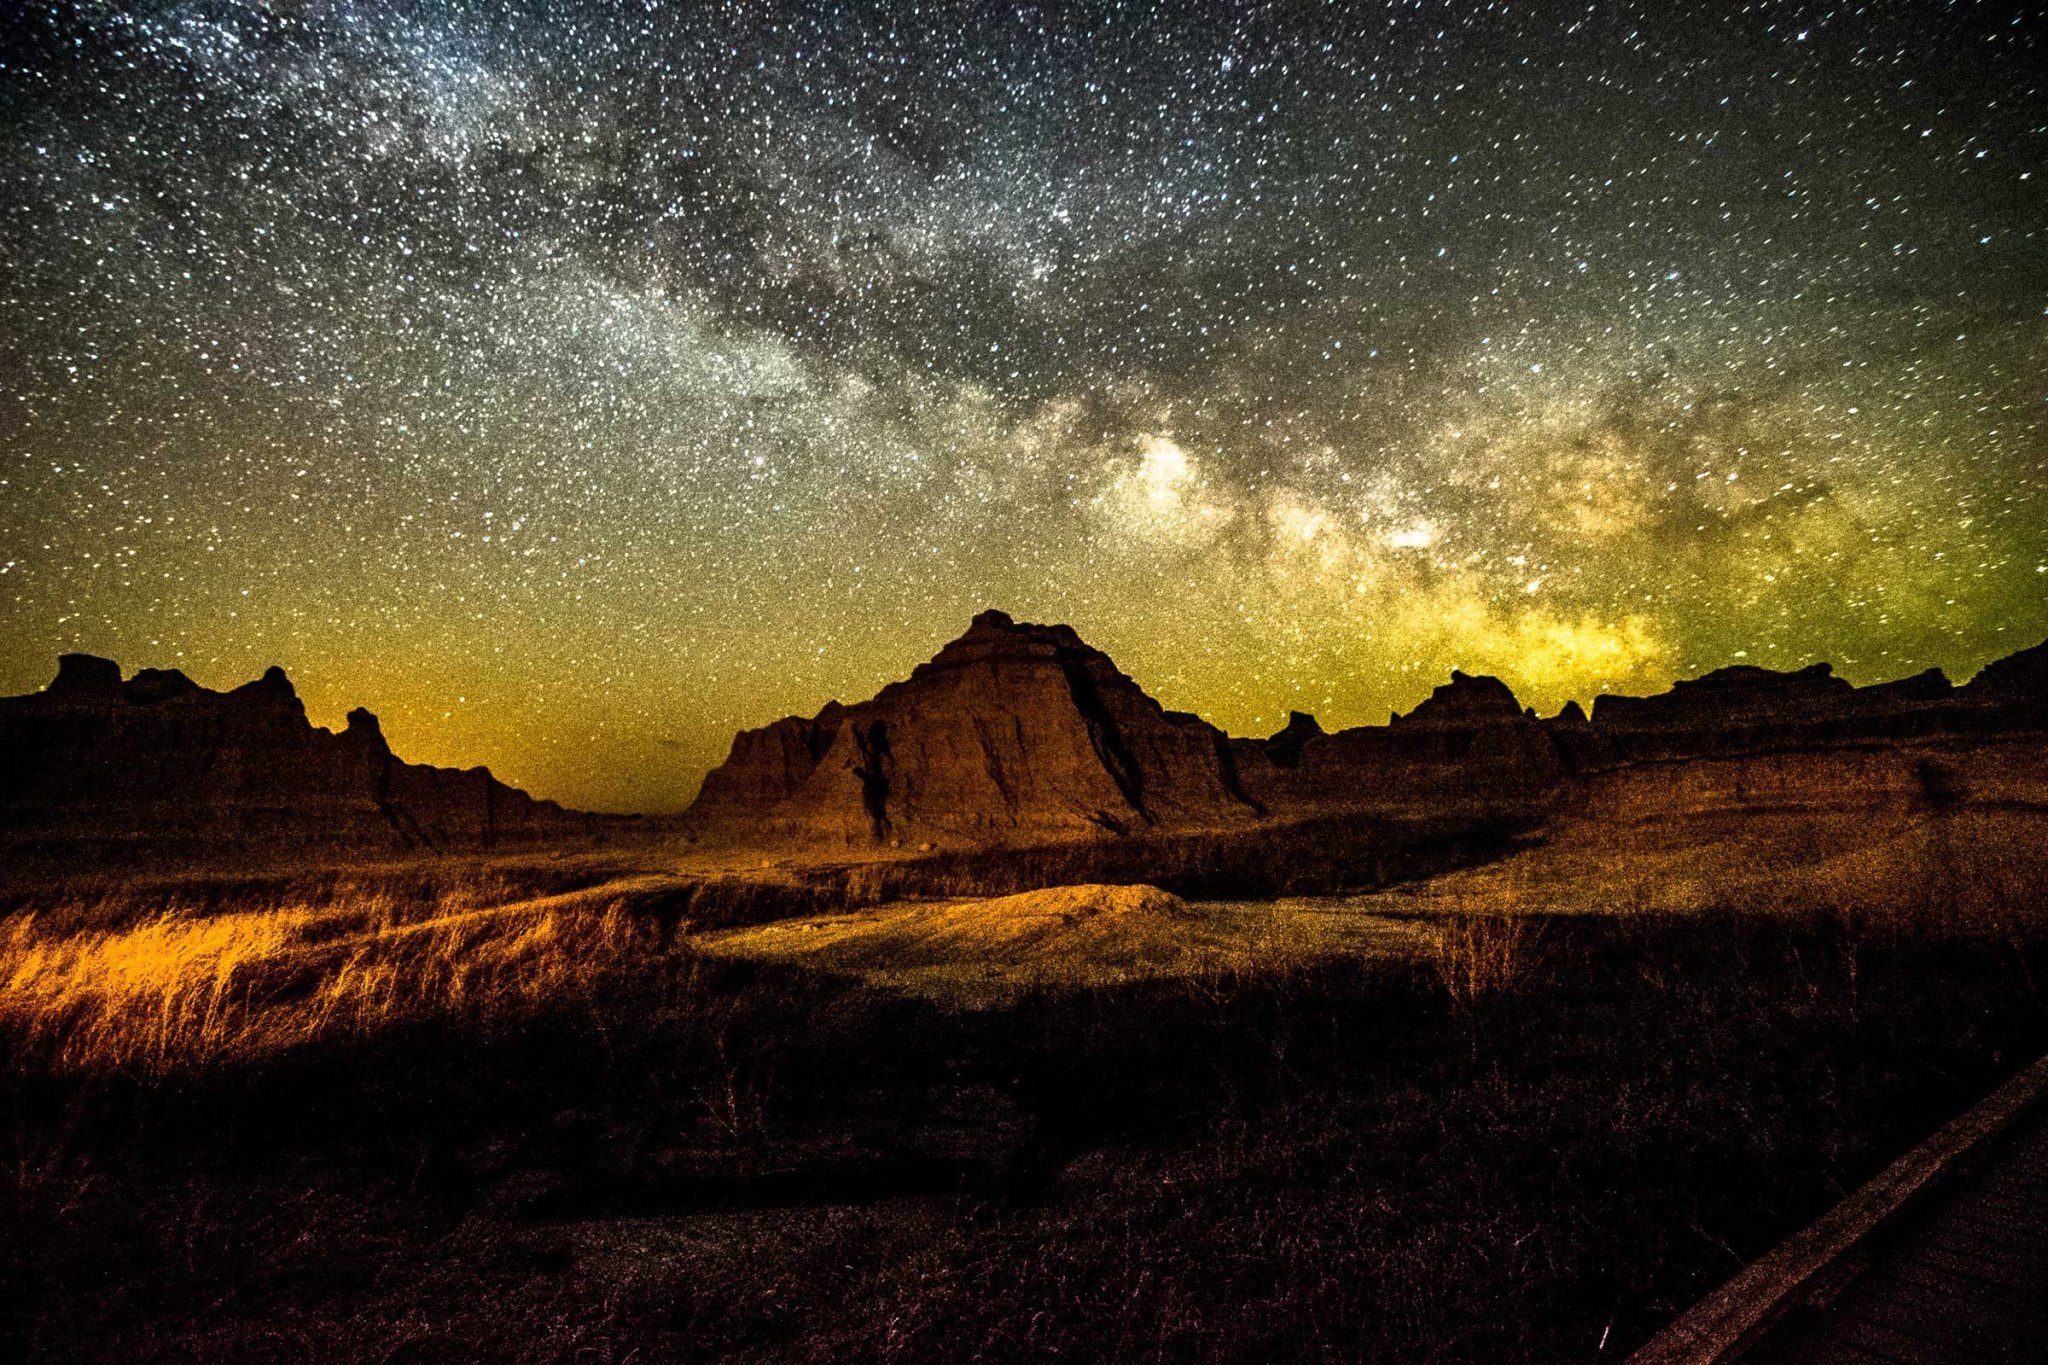 Spectacular Photographs of America’s National Parks That Will Leave You Awestruck